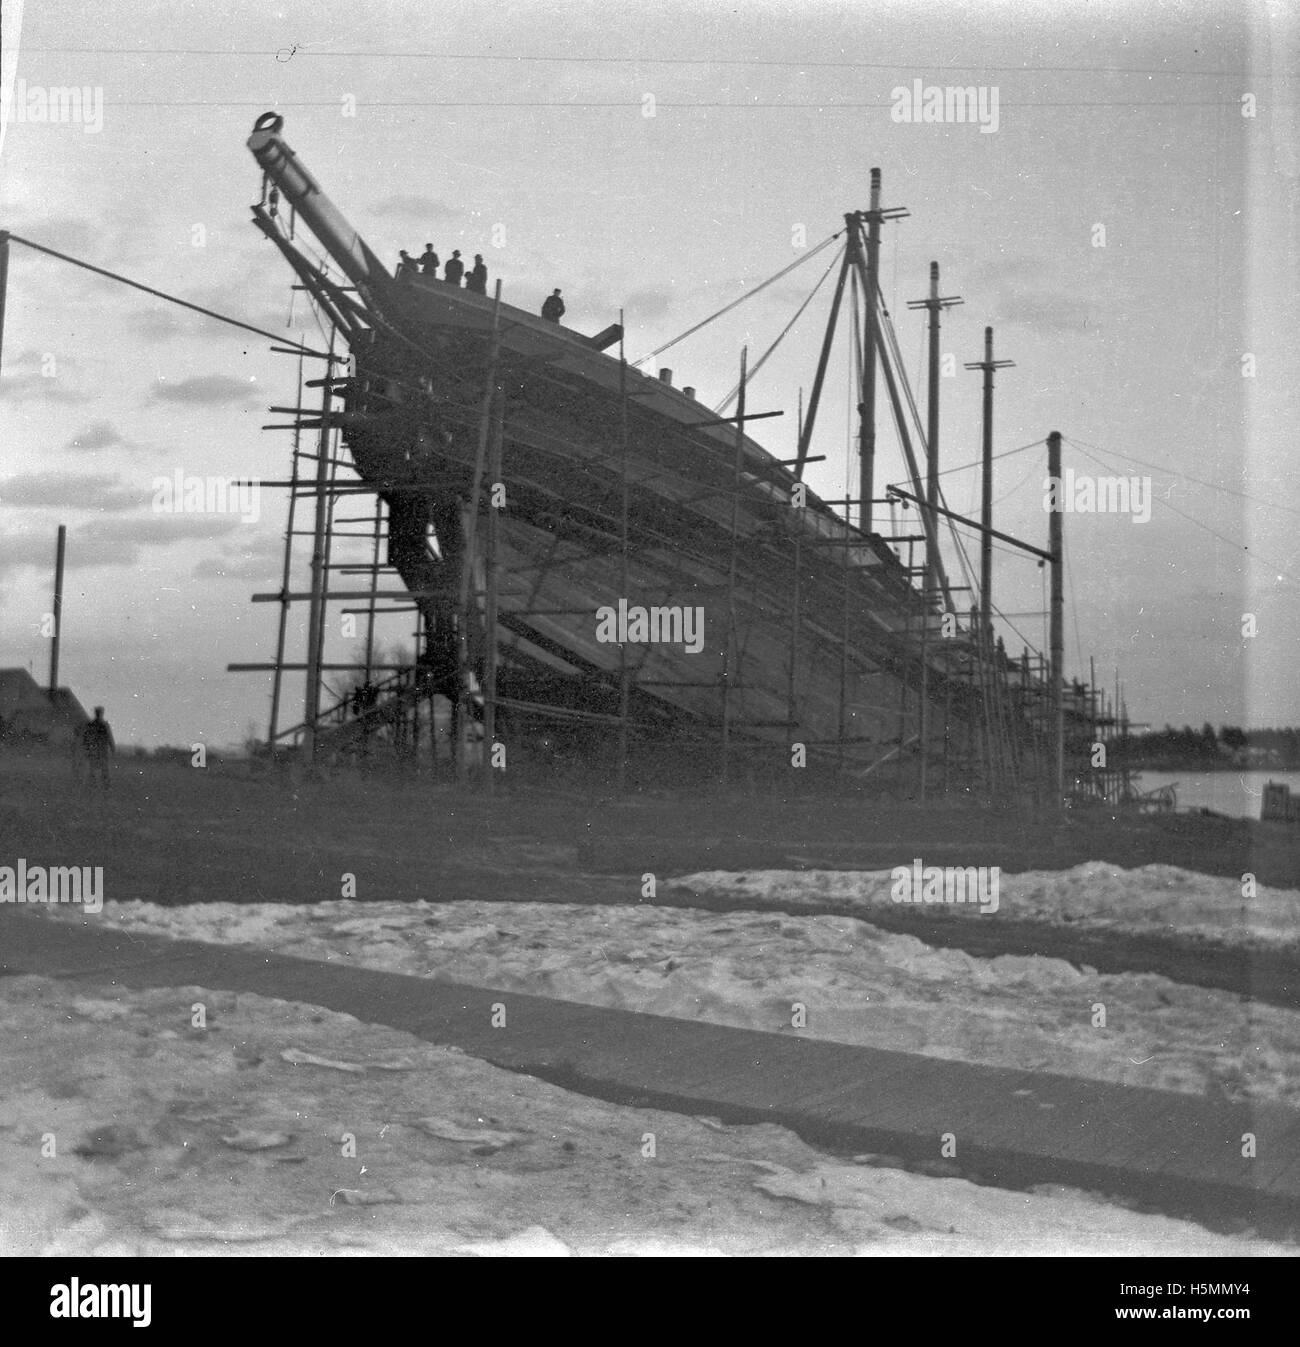 Construction of the 5-masted schooner John B. Prescott in 1898. The largest schooner in the world at that time, she was built to carry 4300 tons of coal. More than 10,000 people turned out for the launching at the Bean shipyard in Camden.  The vessel was 282 feet long, weighing 2249 tons with masts 168 feet tall.  The vessel was sheathed in iron to protect it from the ice. Stock Photo